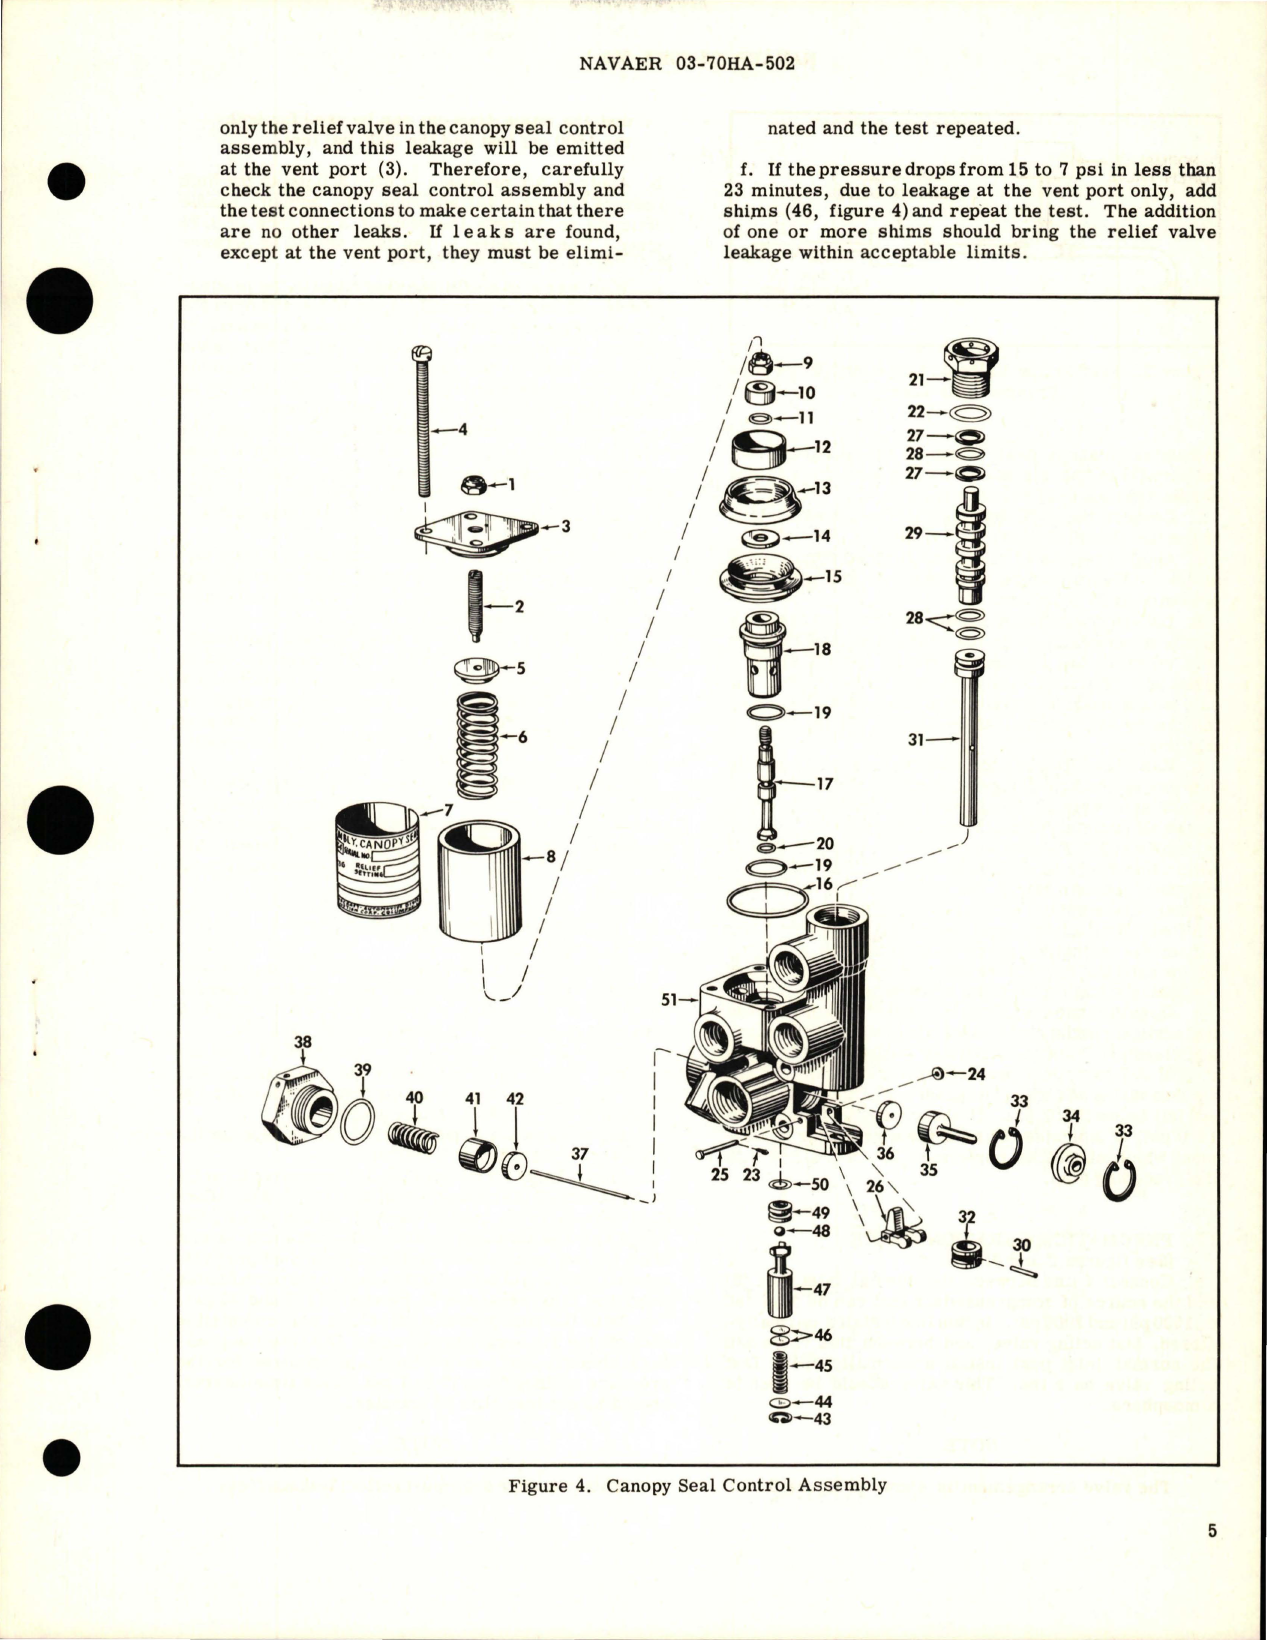 Sample page 5 from AirCorps Library document: Overhaul Instructions with Parts Breakdown for Canopy Seal Control Assembly - Part 34C64 